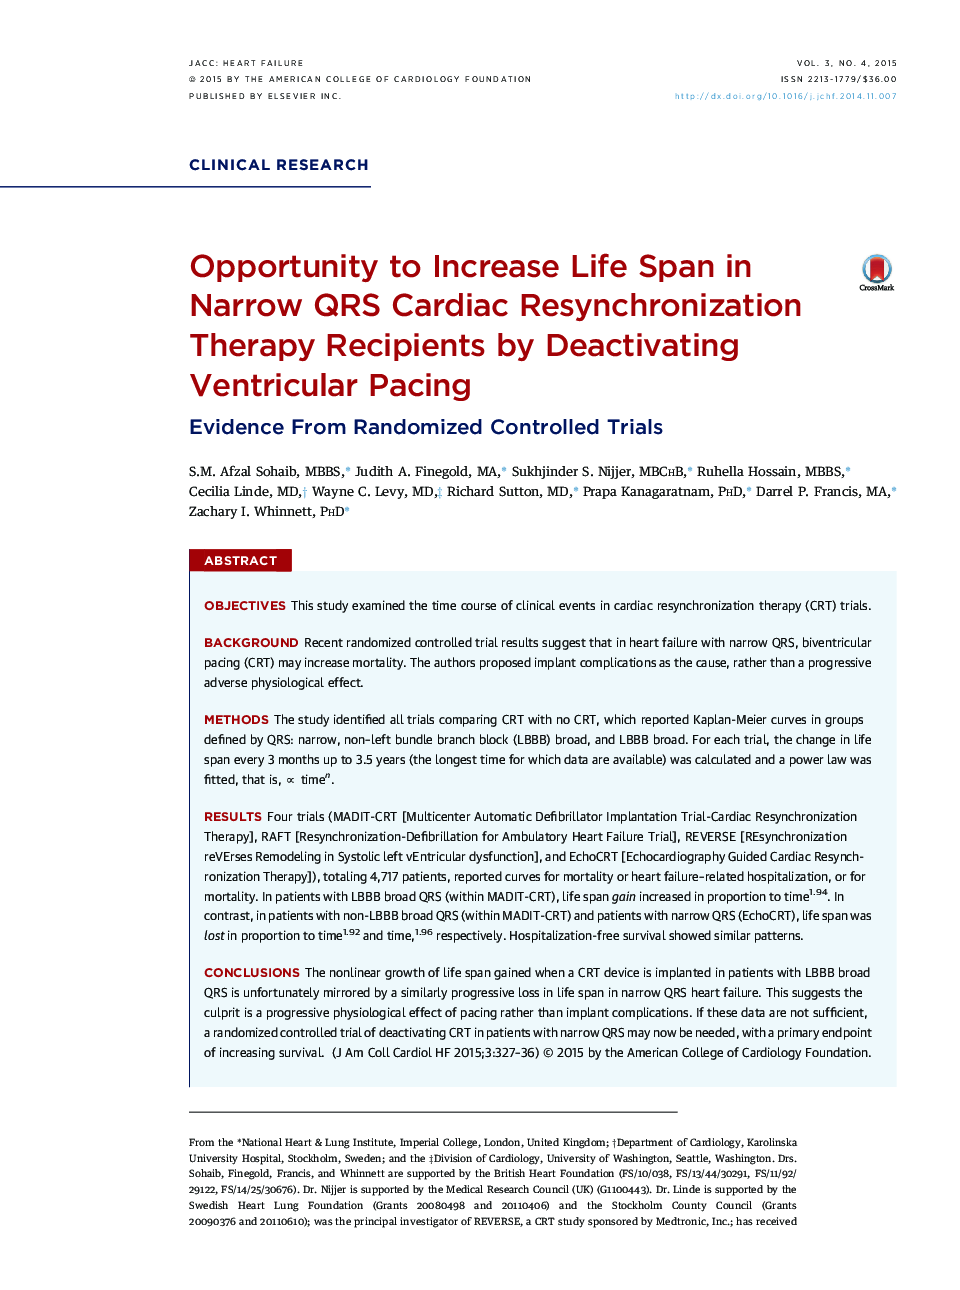 Opportunity to Increase Life Span in Narrow QRS Cardiac Resynchronization Therapy Recipients by Deactivating Ventricular Pacing : Evidence From Randomized Controlled Trials